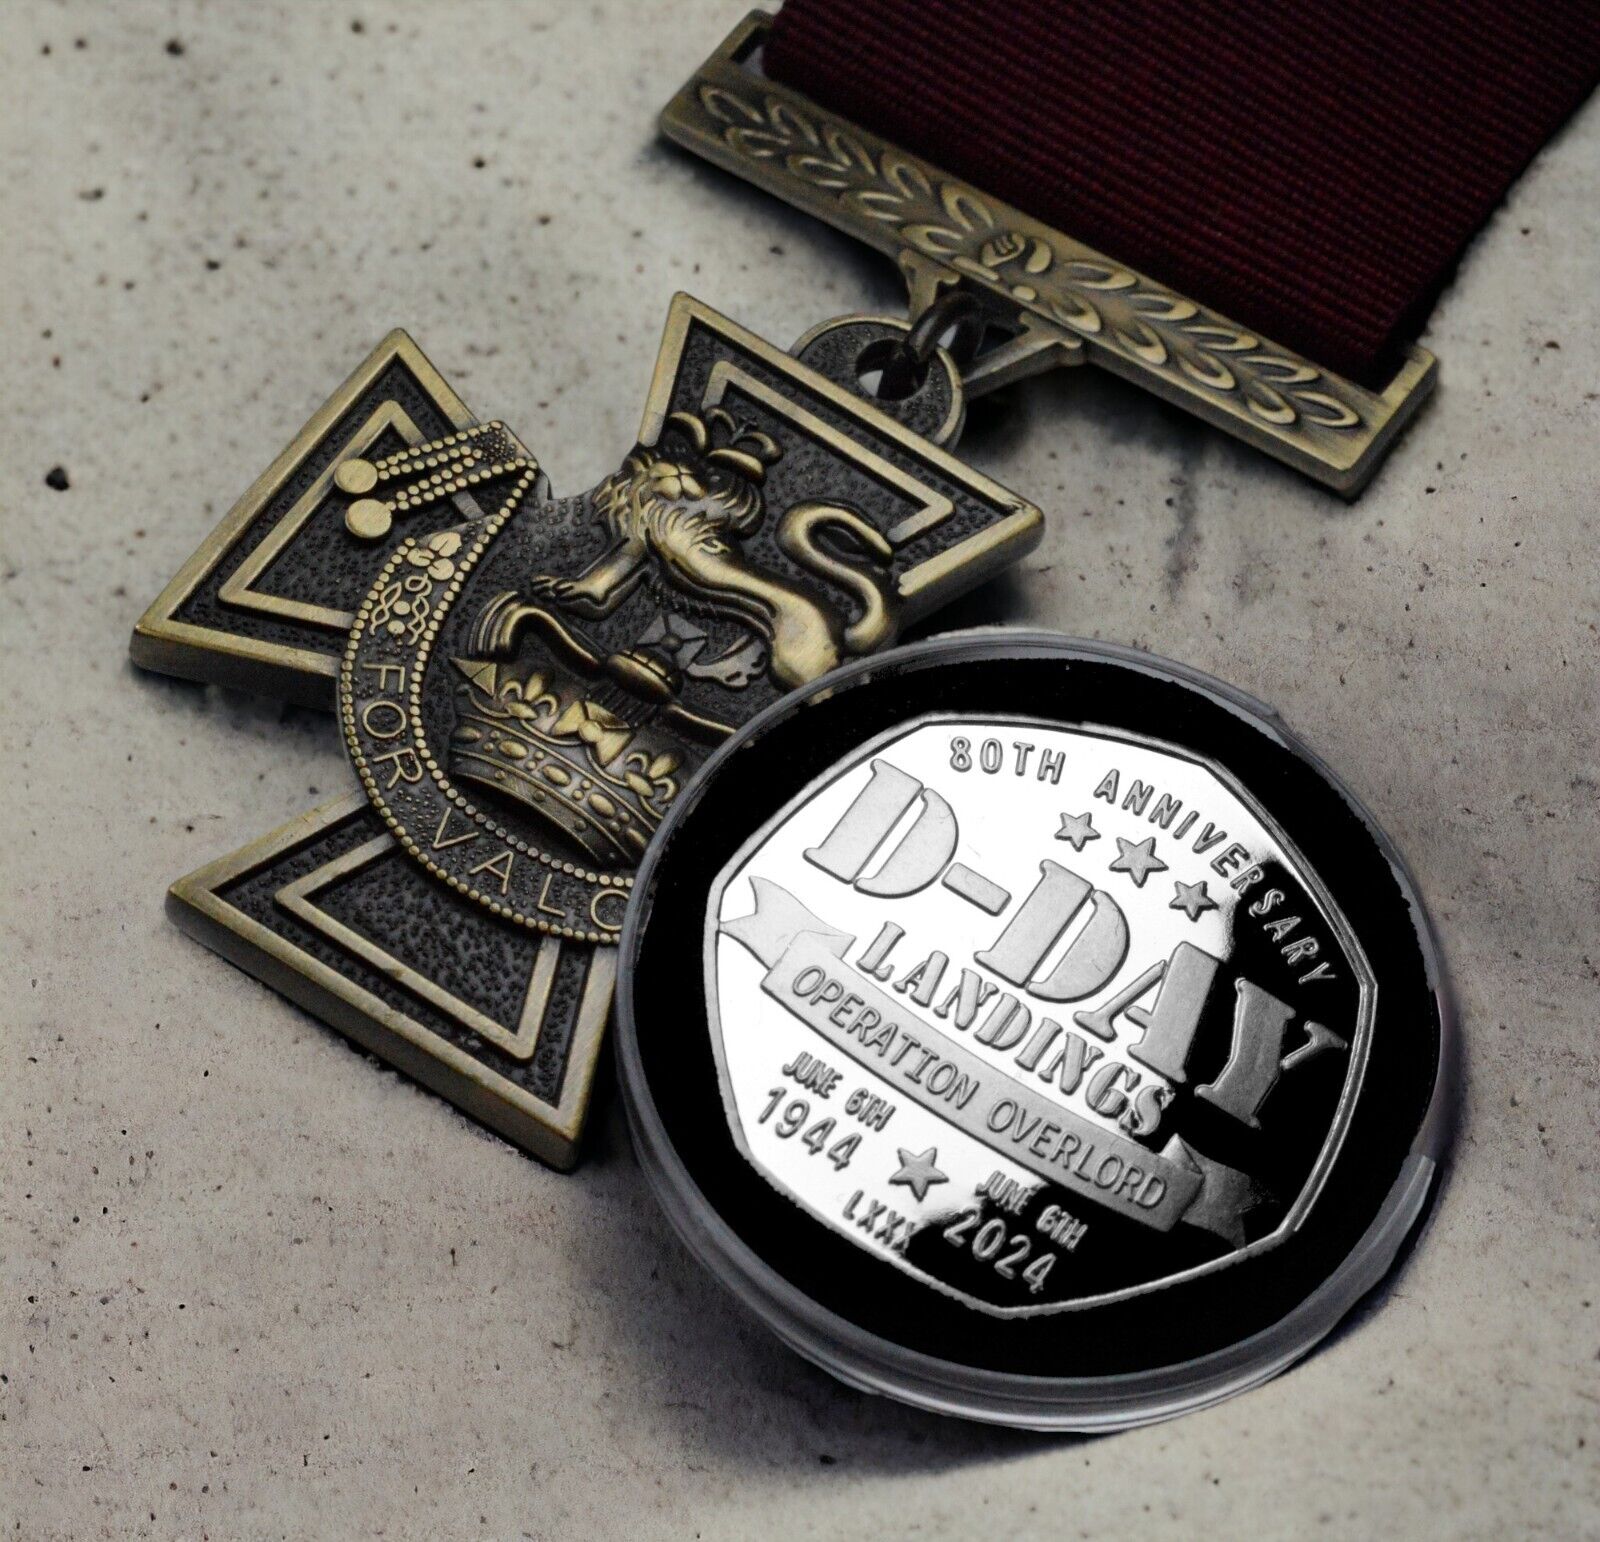 D-DAY LANDINGS 80th Anniversary Commemorative Coin and Victoria Cross Medal Set